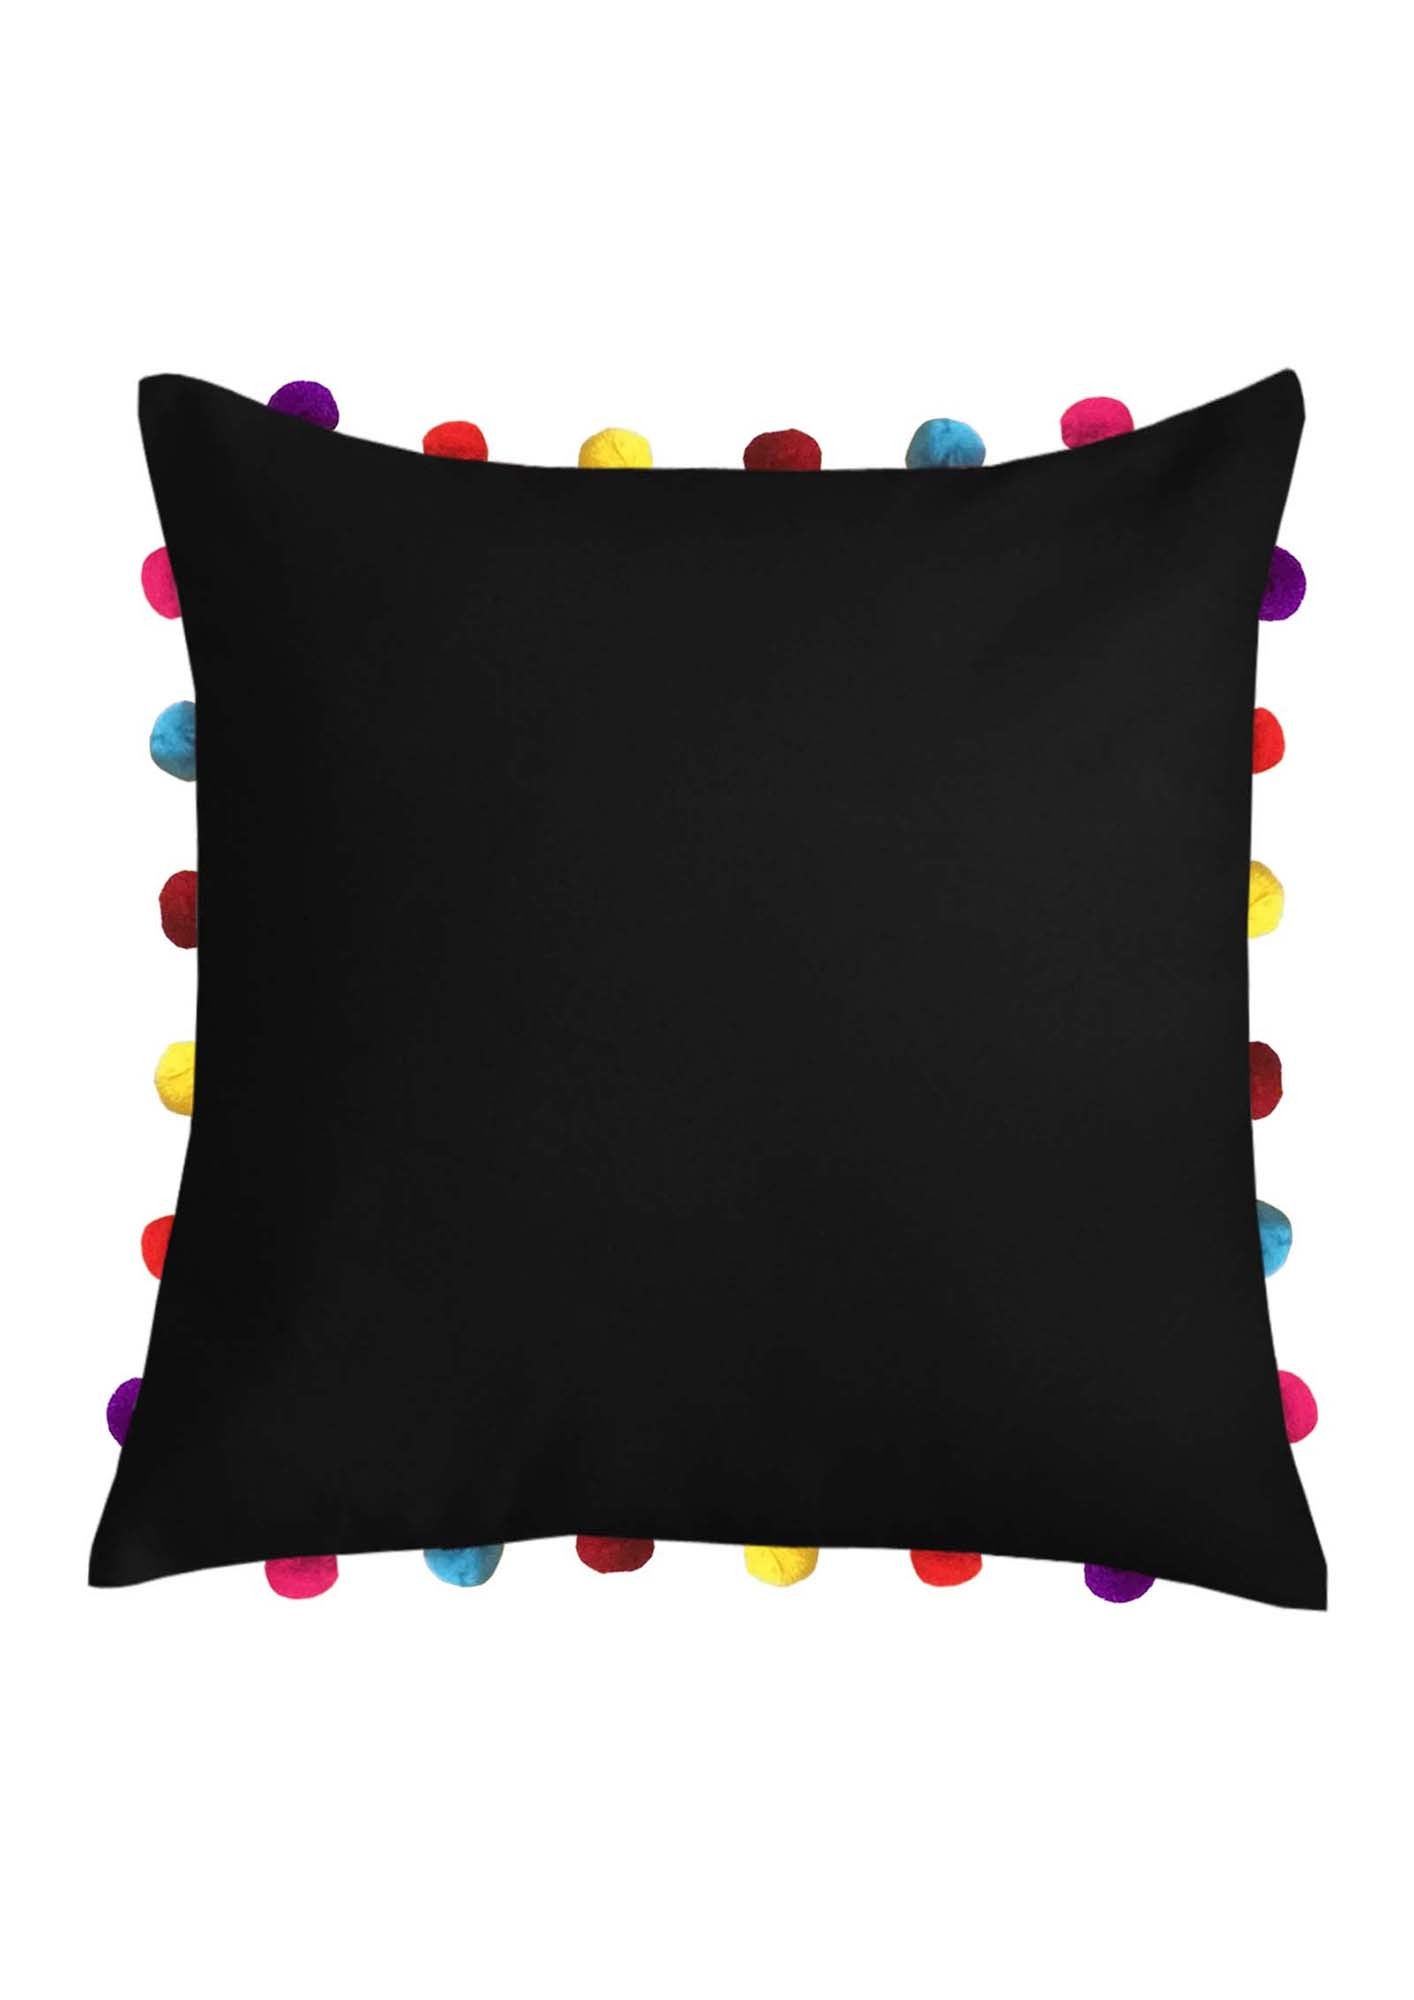 Lushomes Pirate Black Sofa Cushion Cover Online with Colorful Pom Pom (Pack of 1 pc, 18 x 18 inches)